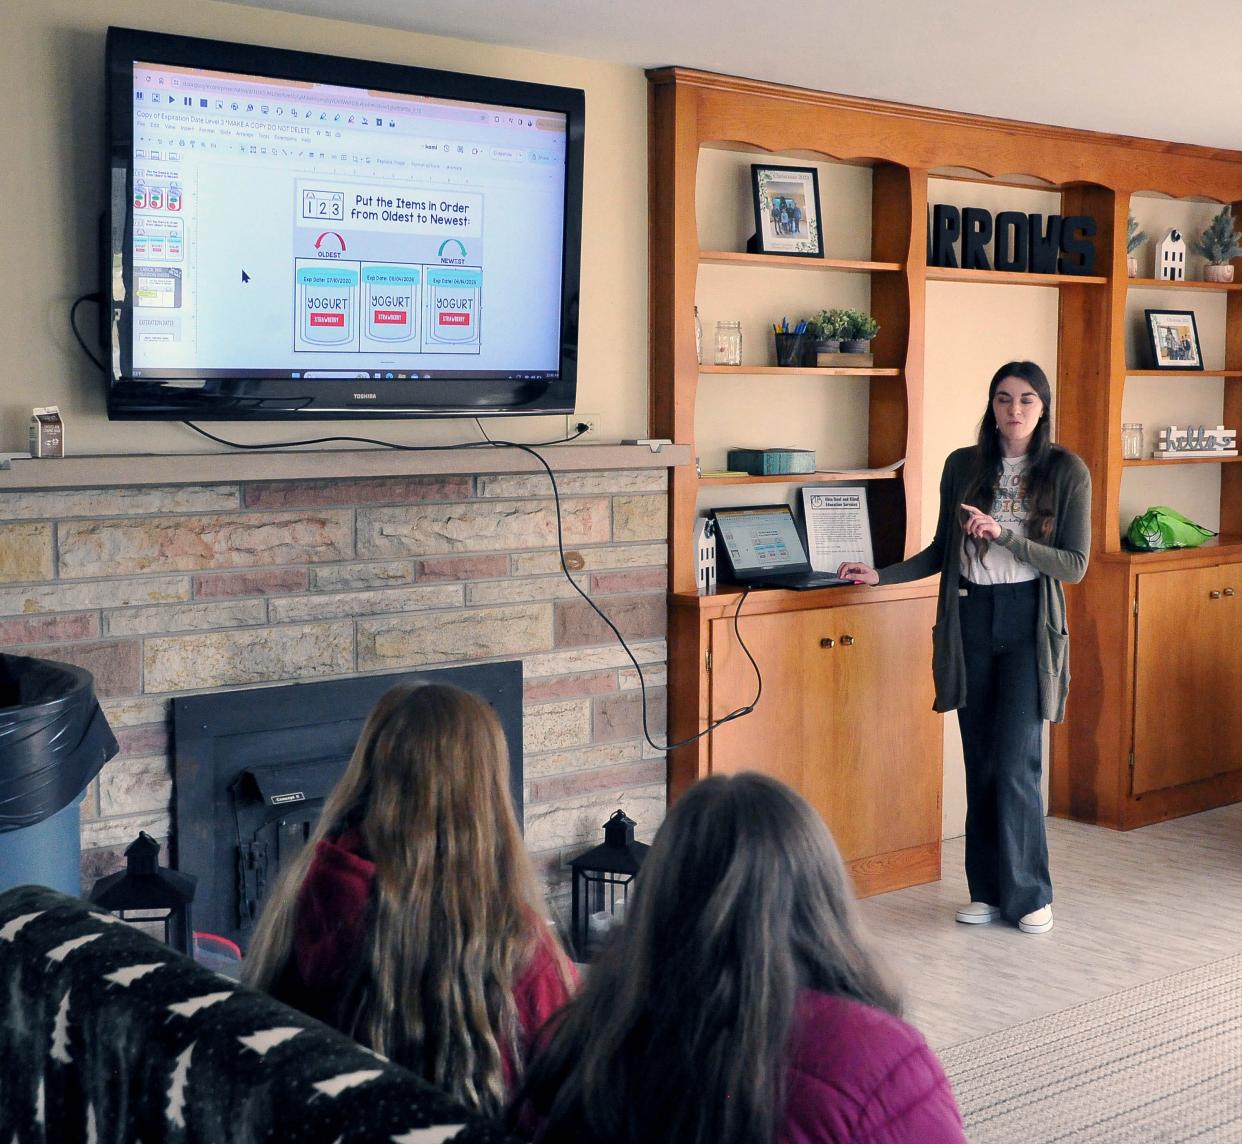 Speech and Language Pathologist Cassie Flack teaches a life skills class to Ashland students at the home on the Wertman/Ferguson family's historic property, which was donated to the Ashland City Schools by Mary Lou Wertman in 2016.